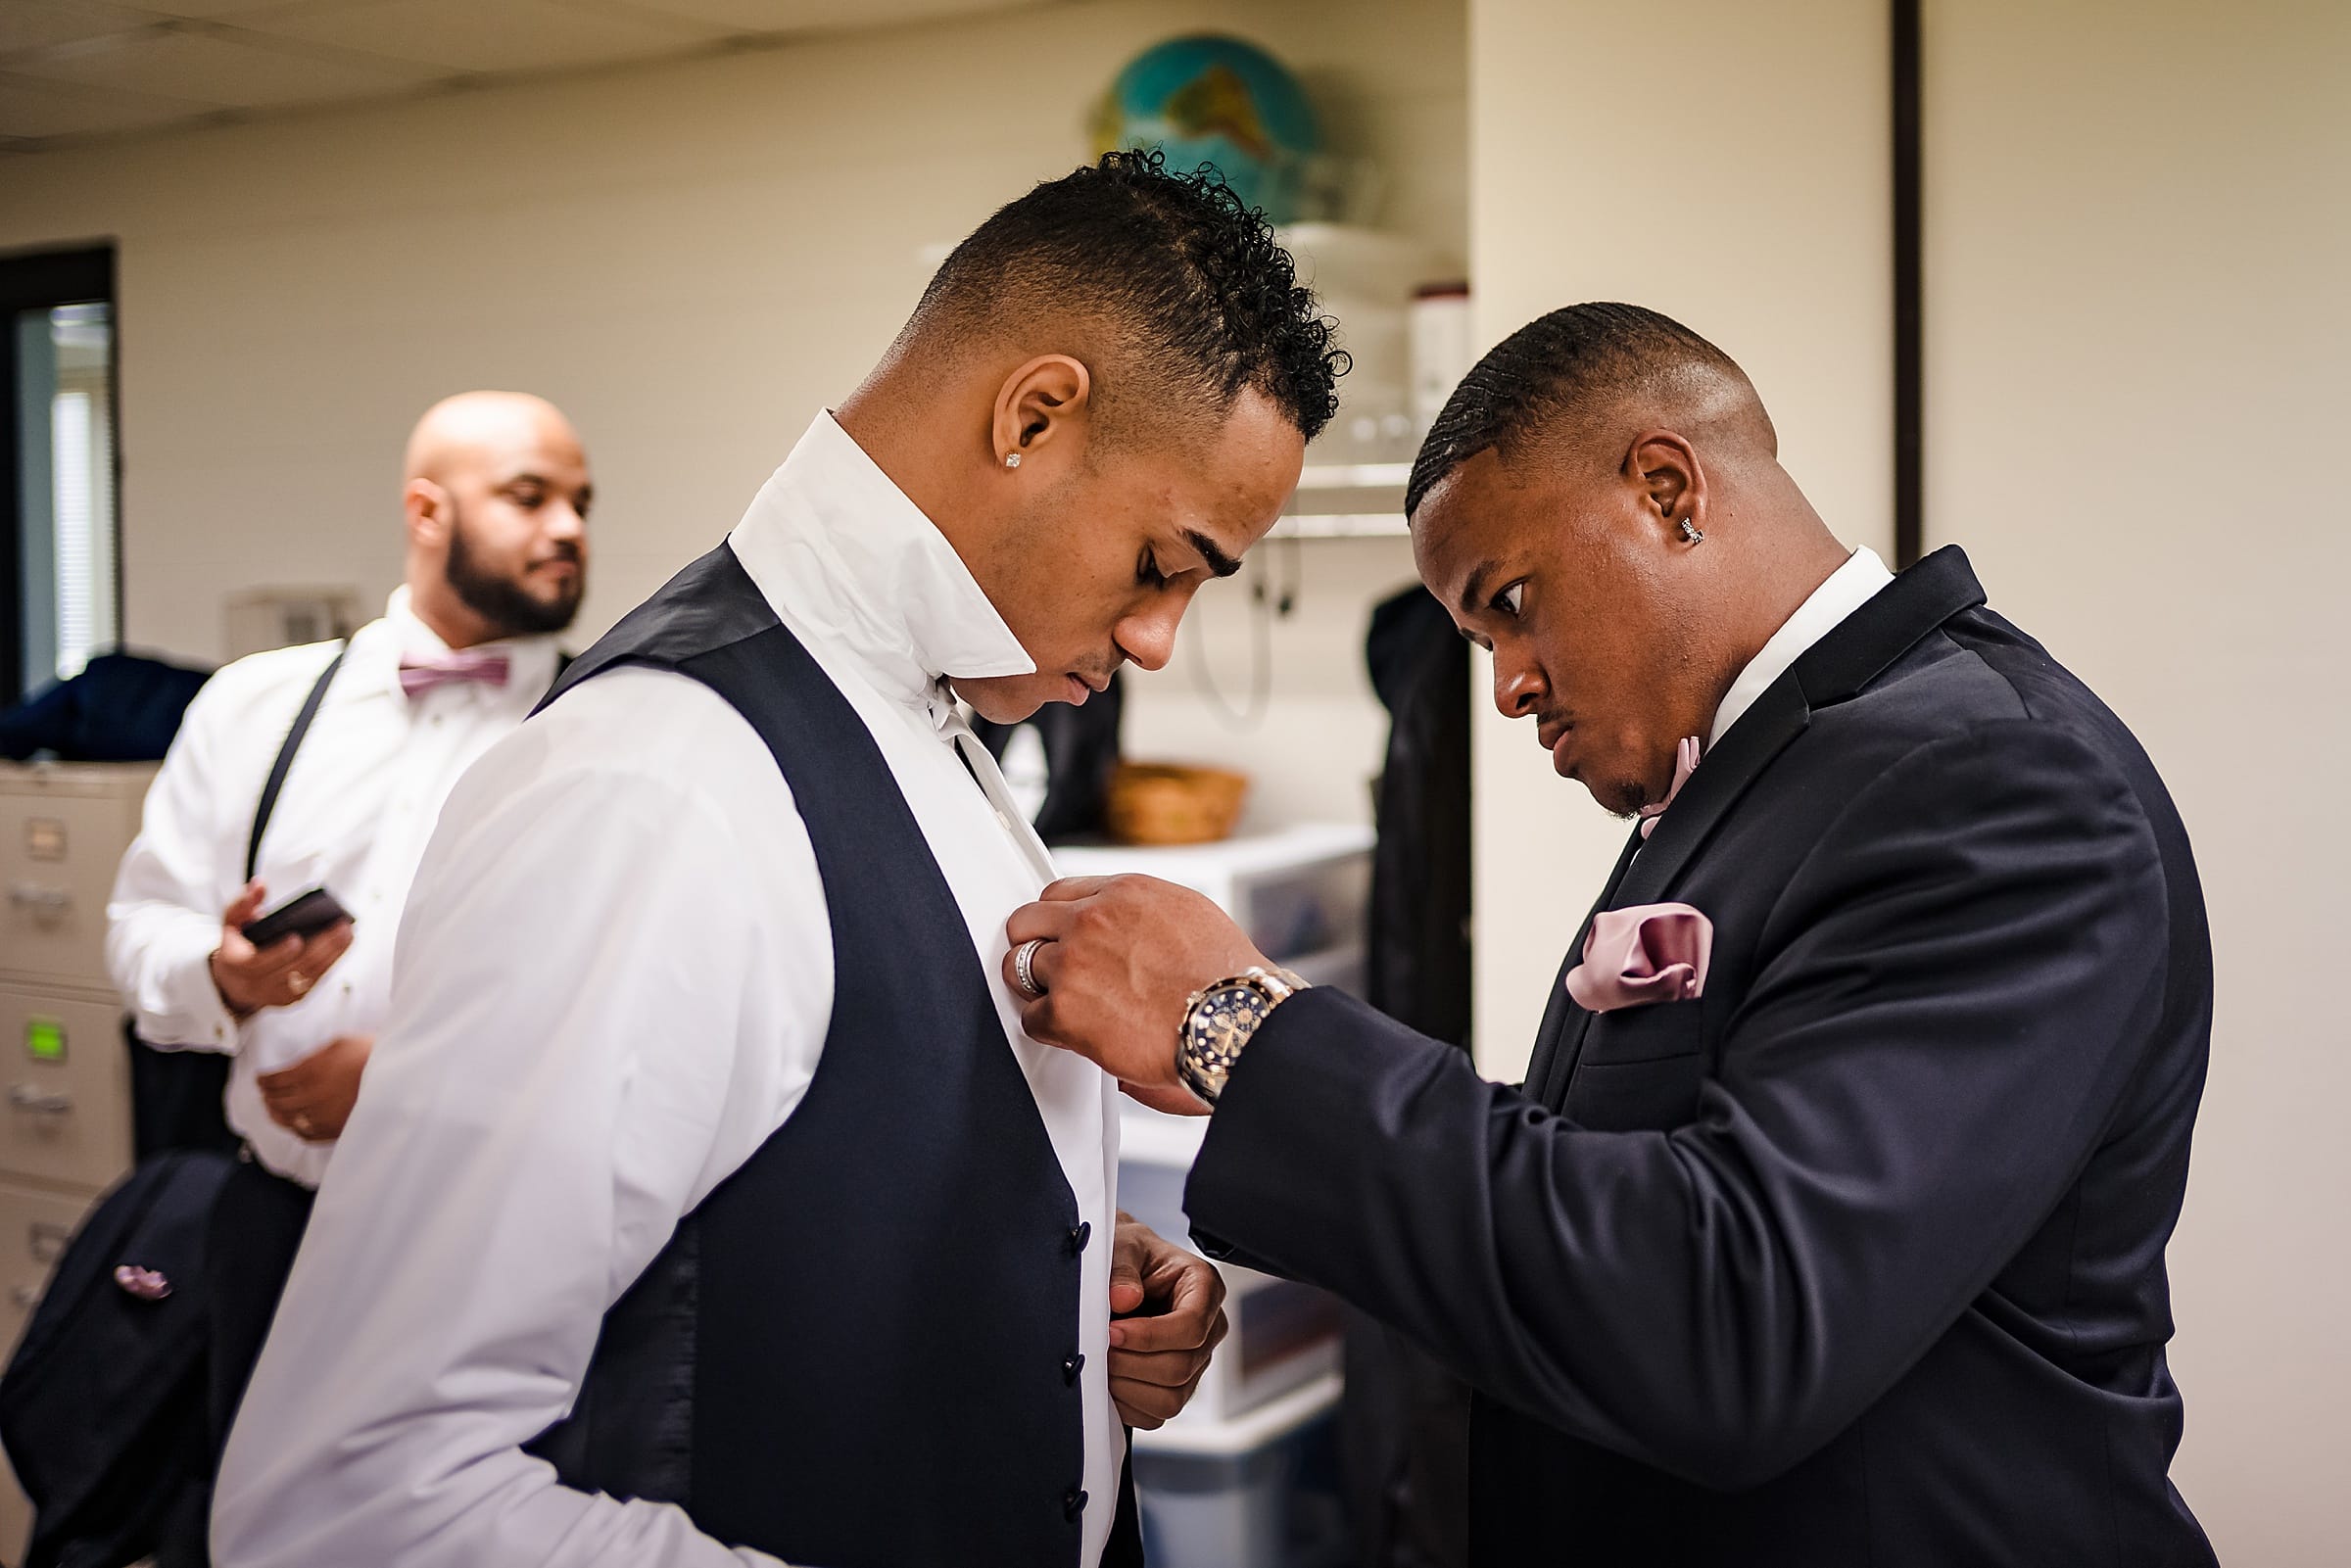 Two young men get dressed for a wedding day